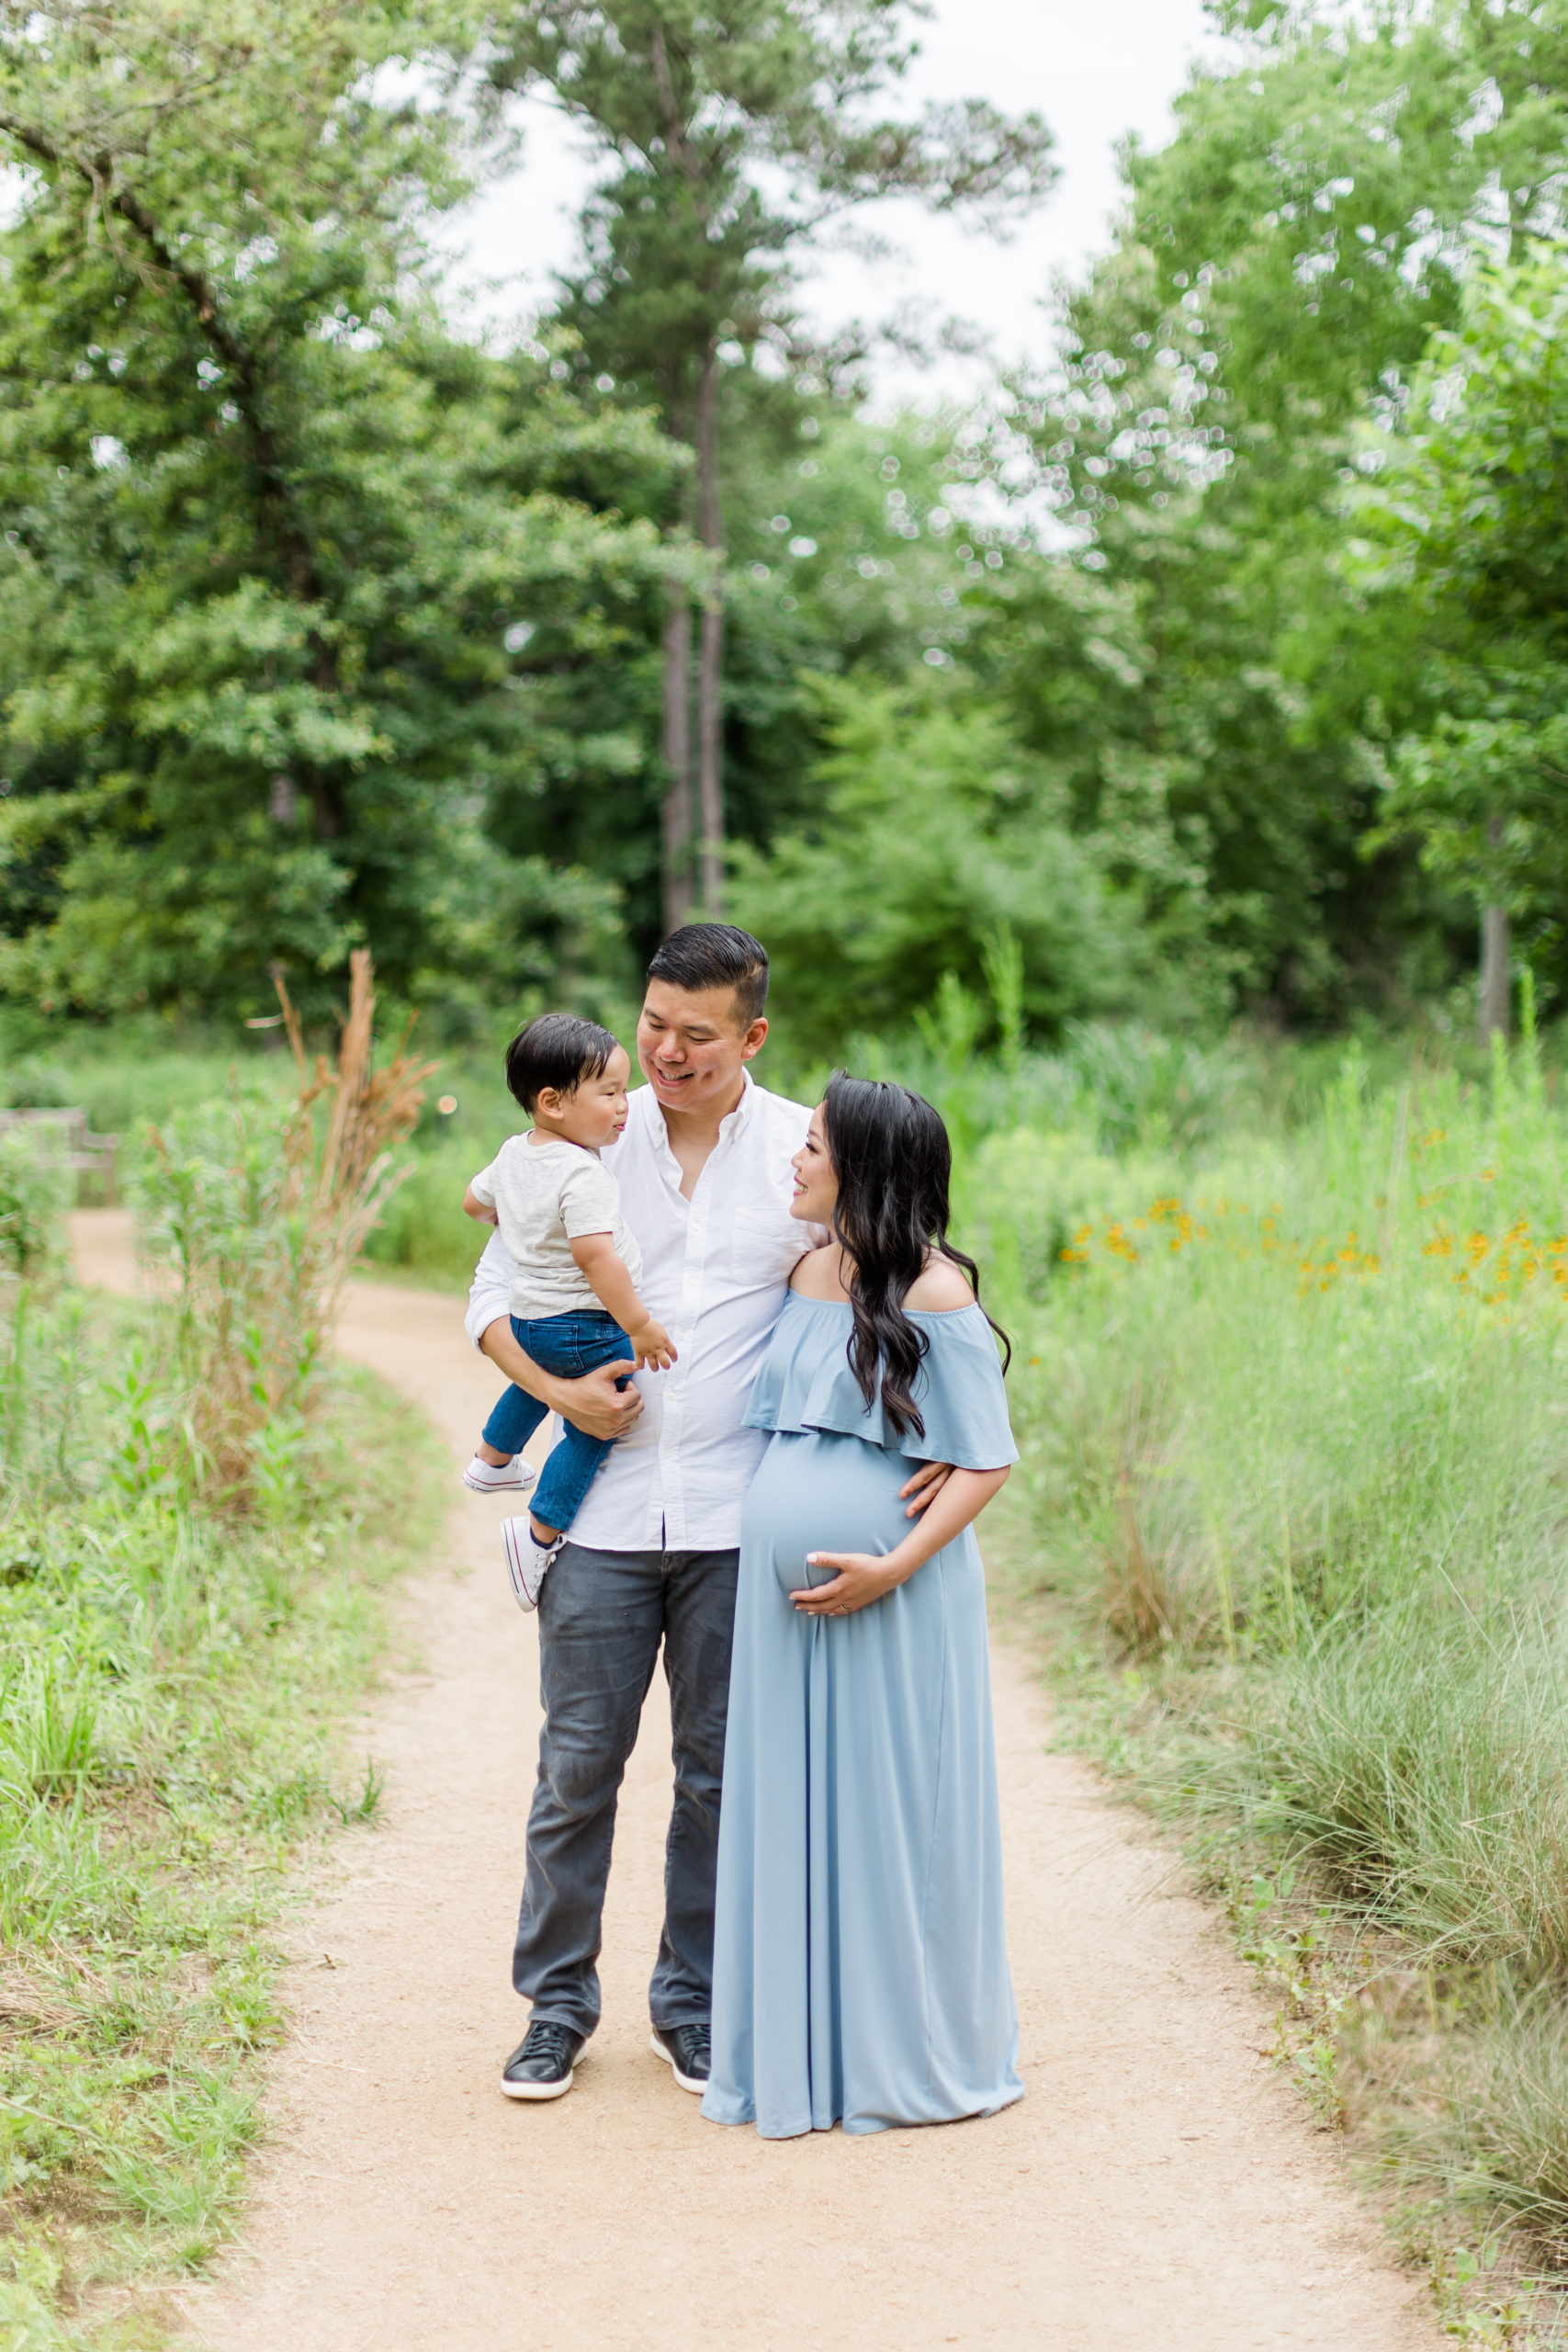 On an unpaved road in Houston, Texas, this family of three pose together happily for their maternity session with Monette Anne Photography. family maternity session womens off the shoulder maxi maternity dress pregnancy announcement twin mom baby bump houston texas photographer #HoustonArboretumAndNatureCenter #HoustonTexasMaternityPhotographer #HoustonTexasFamilyPhotographer Houston #HoustonHeightsPhotographer #MonetteAnnePhotography #HoustonTexasPhotographer #MaternityPhotoShoot #PregnancyAnnouncement #BabyBump #ExpectantParents